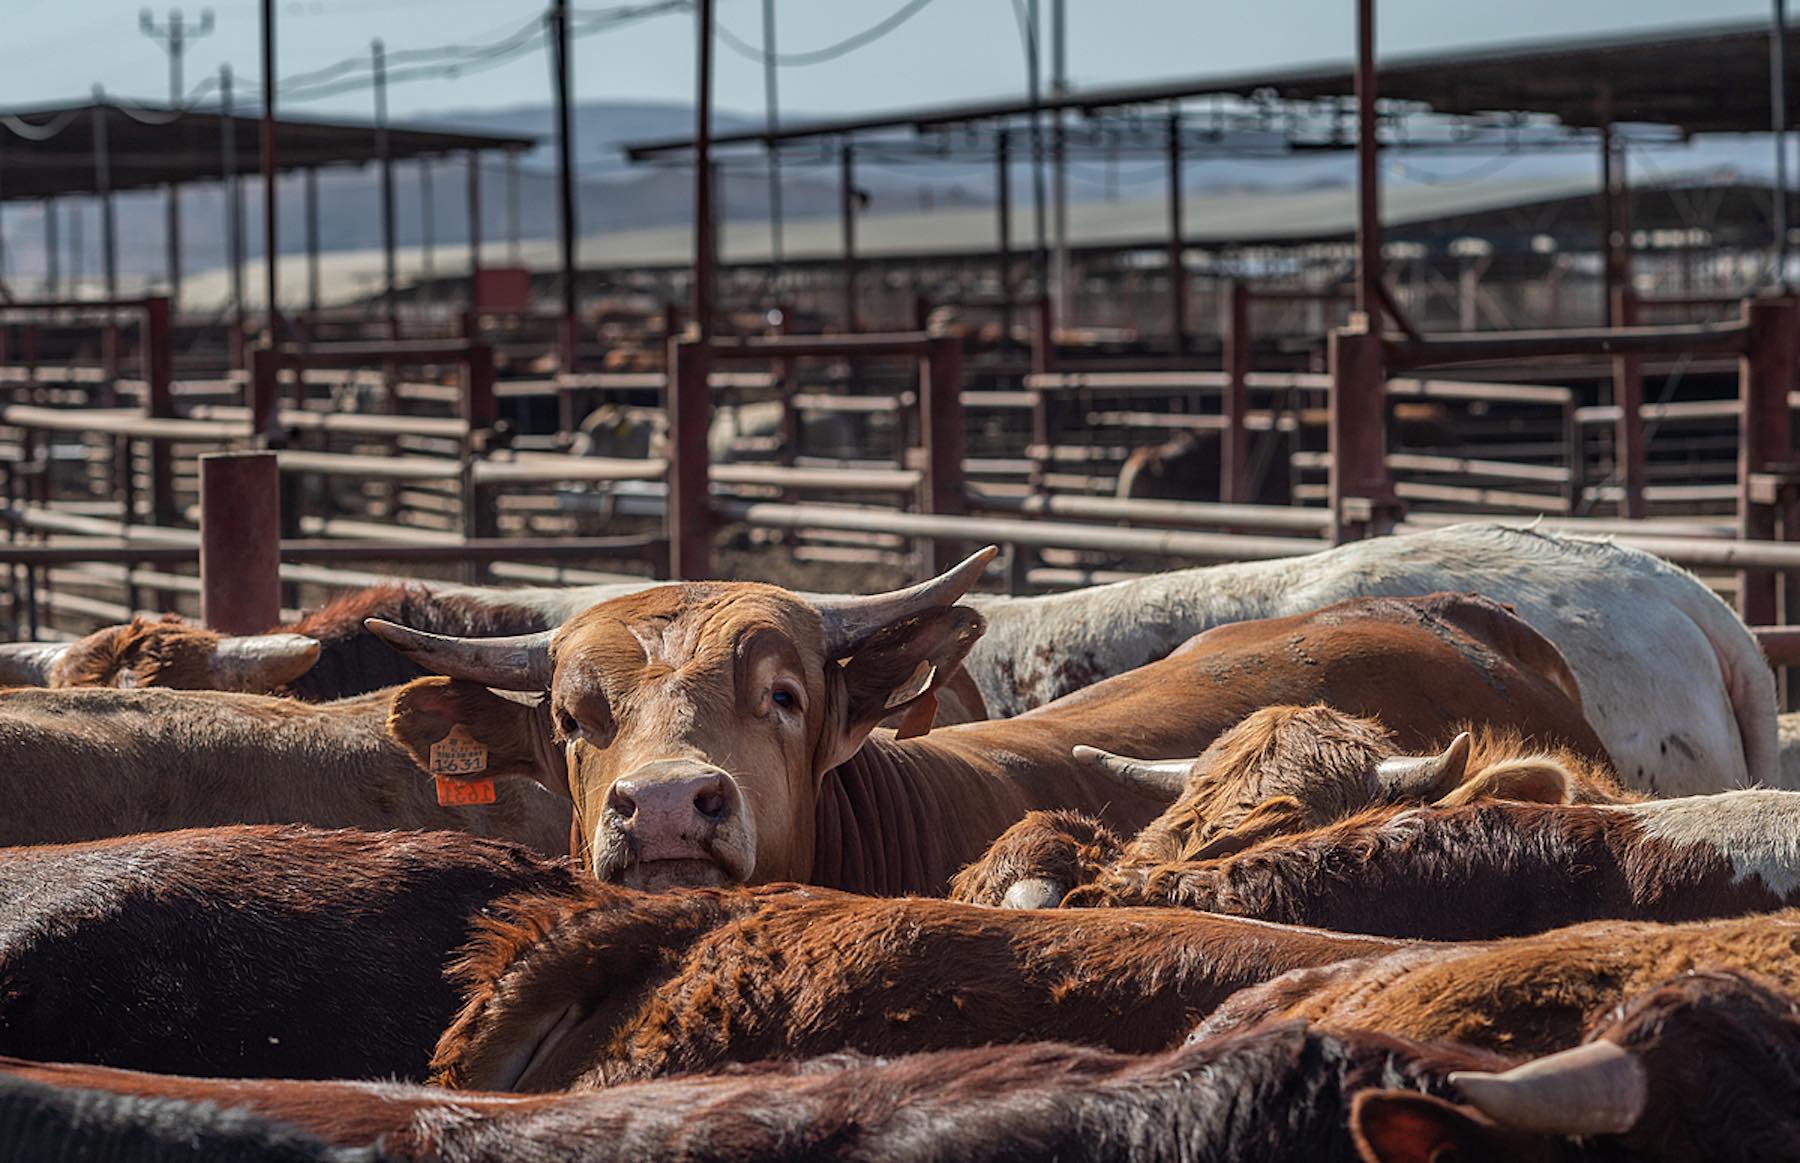 Several cows at a crowded feedlot.